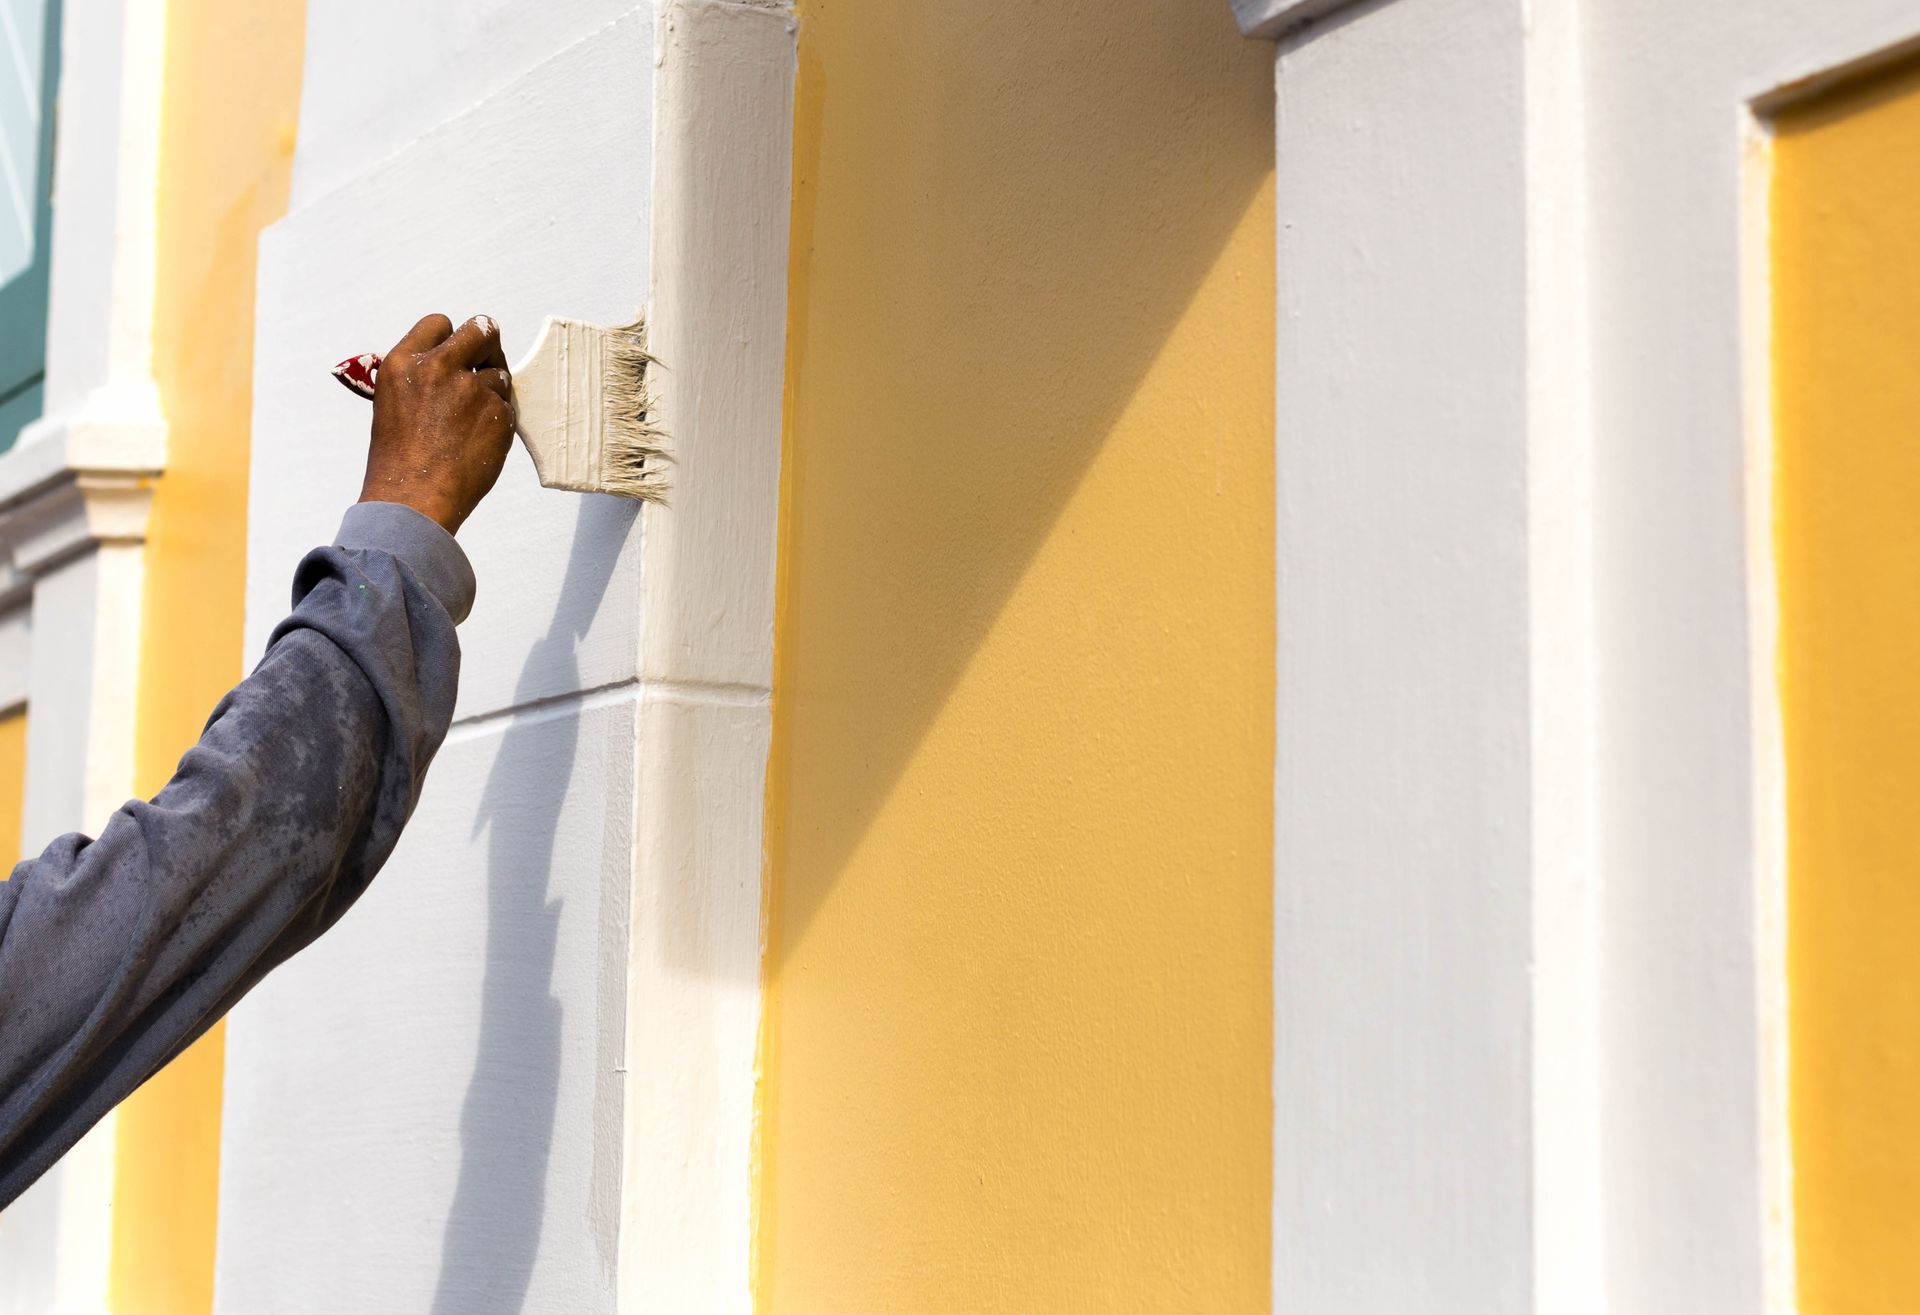 a man paints a yellow and white wall with a brush